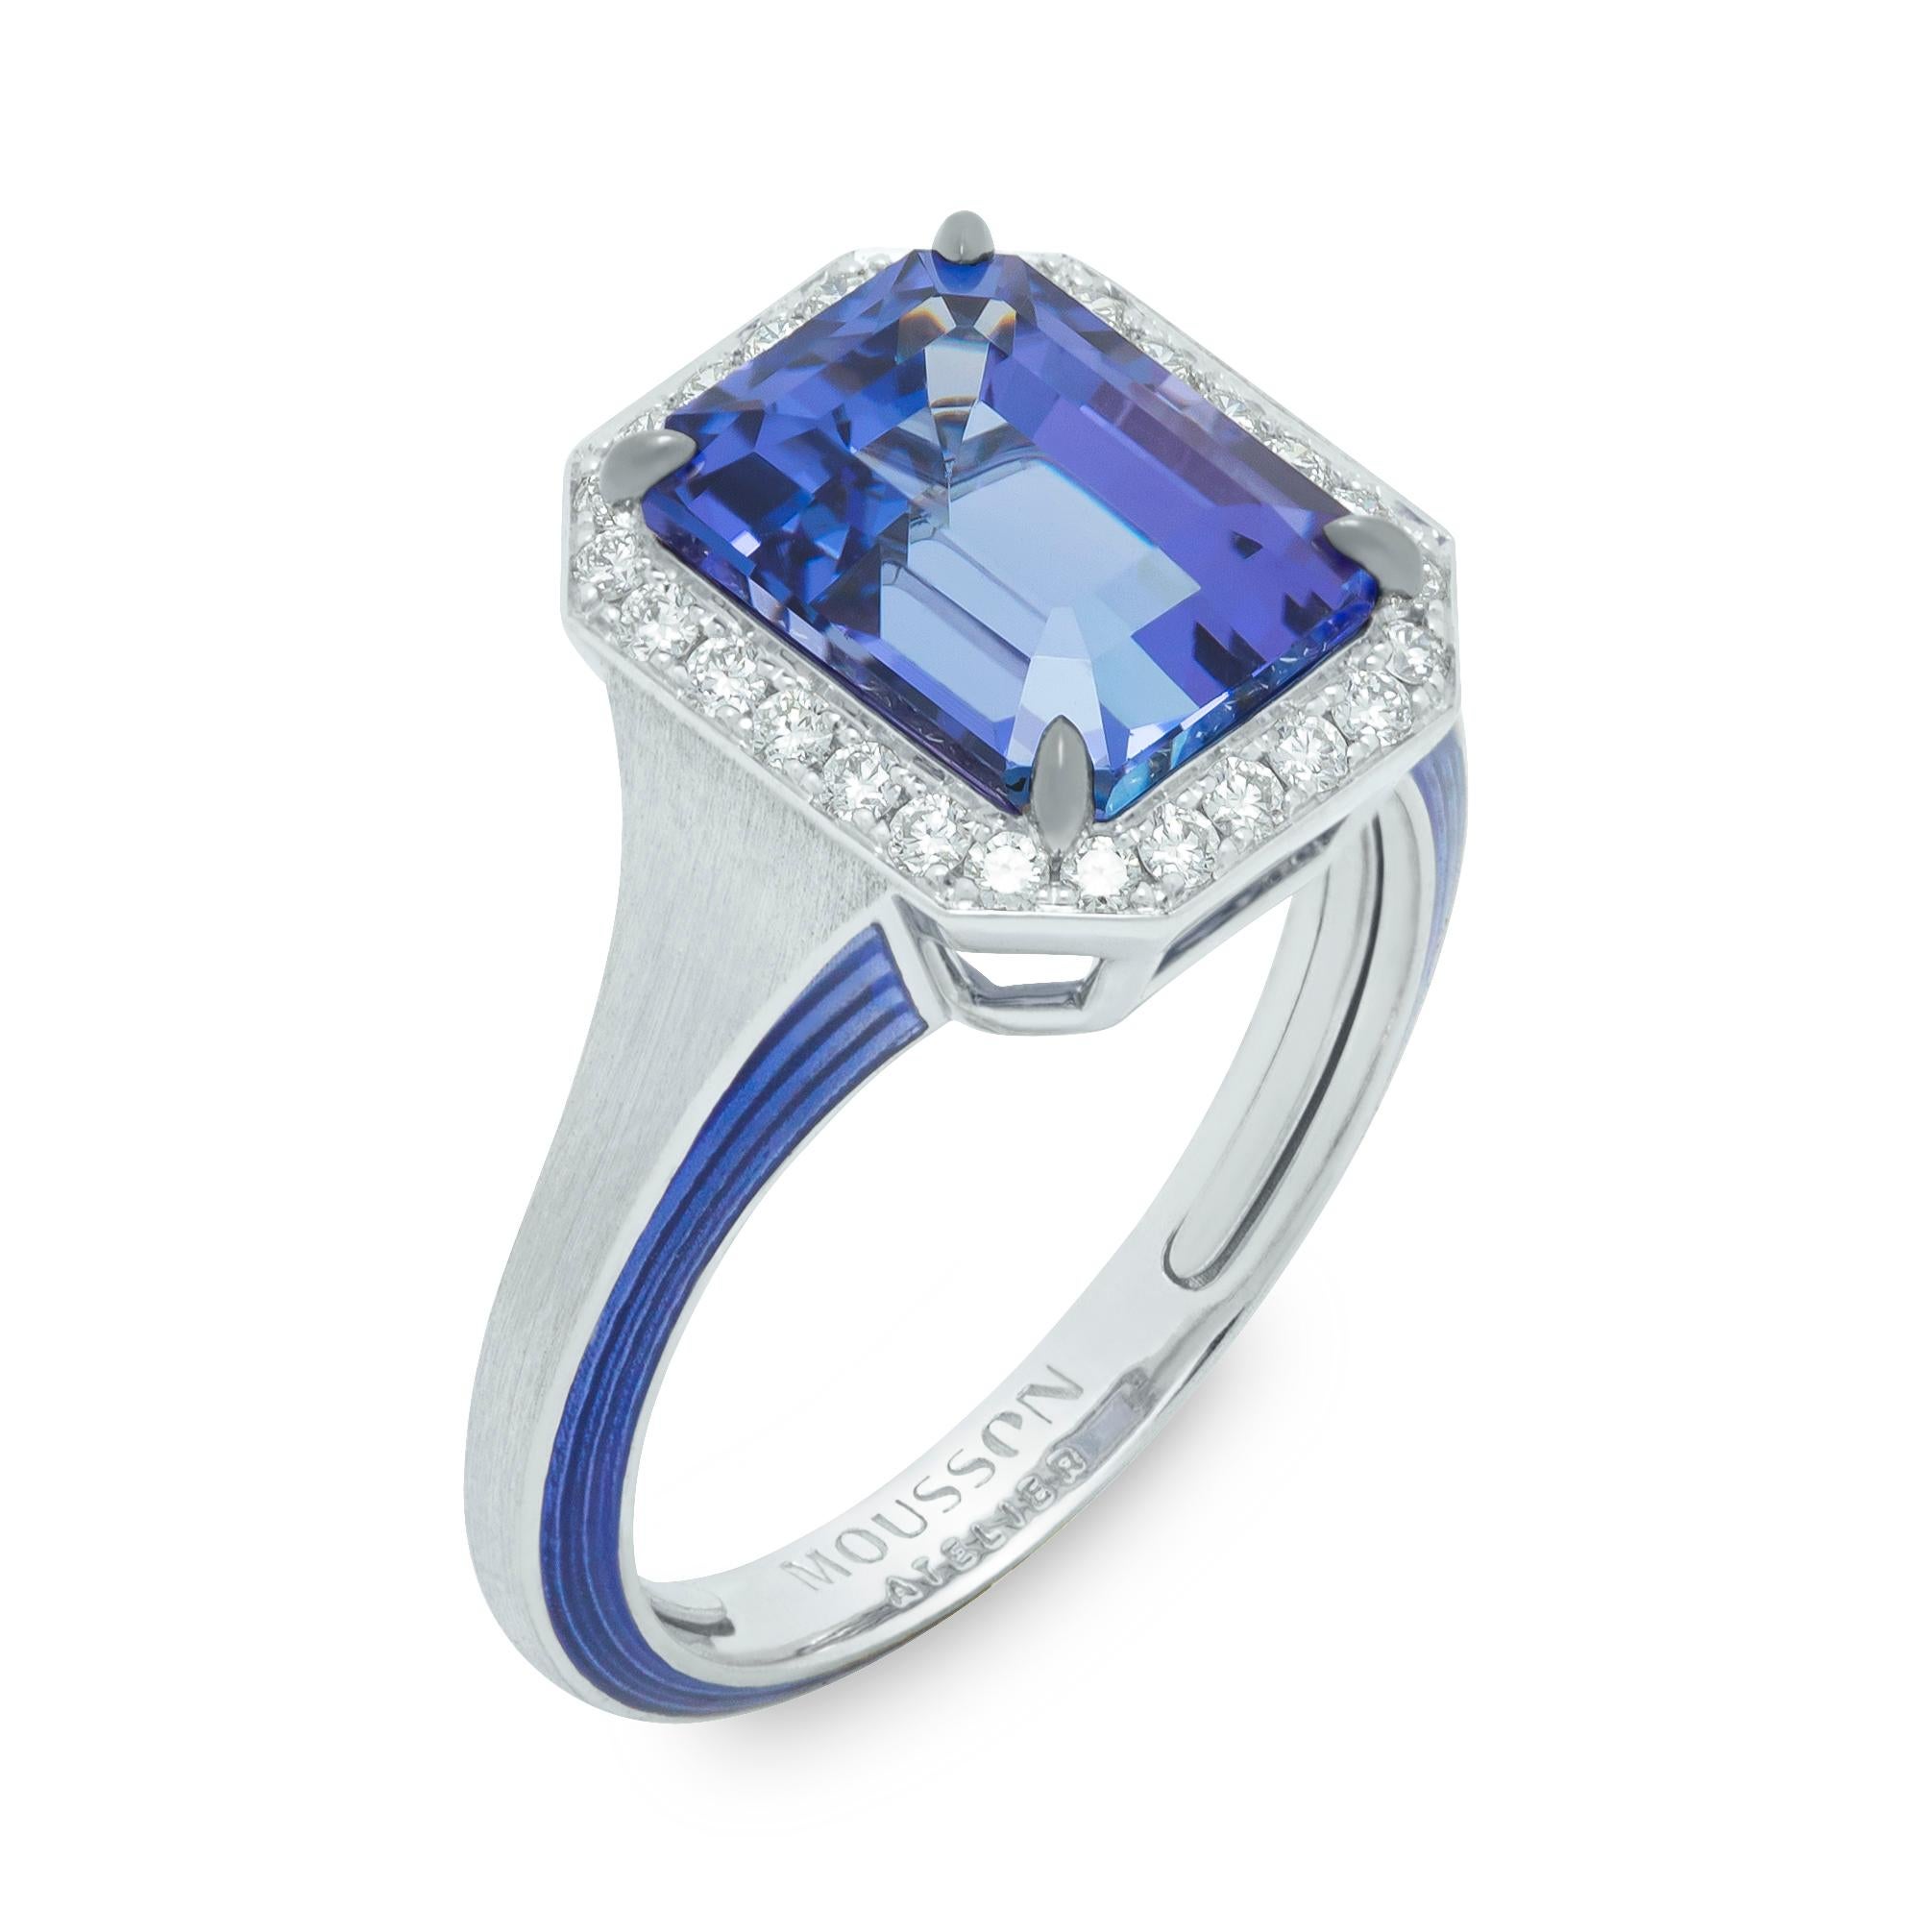 Tanzanite 4.84 Carat Diamonds 18 Karat White Gold Enamel New Classic Ring

We have published a series of new Rings with the same idea but with different details. Introducing a Ring crafted from 18 Karat White Gold, which in a company with 4.84 Carat